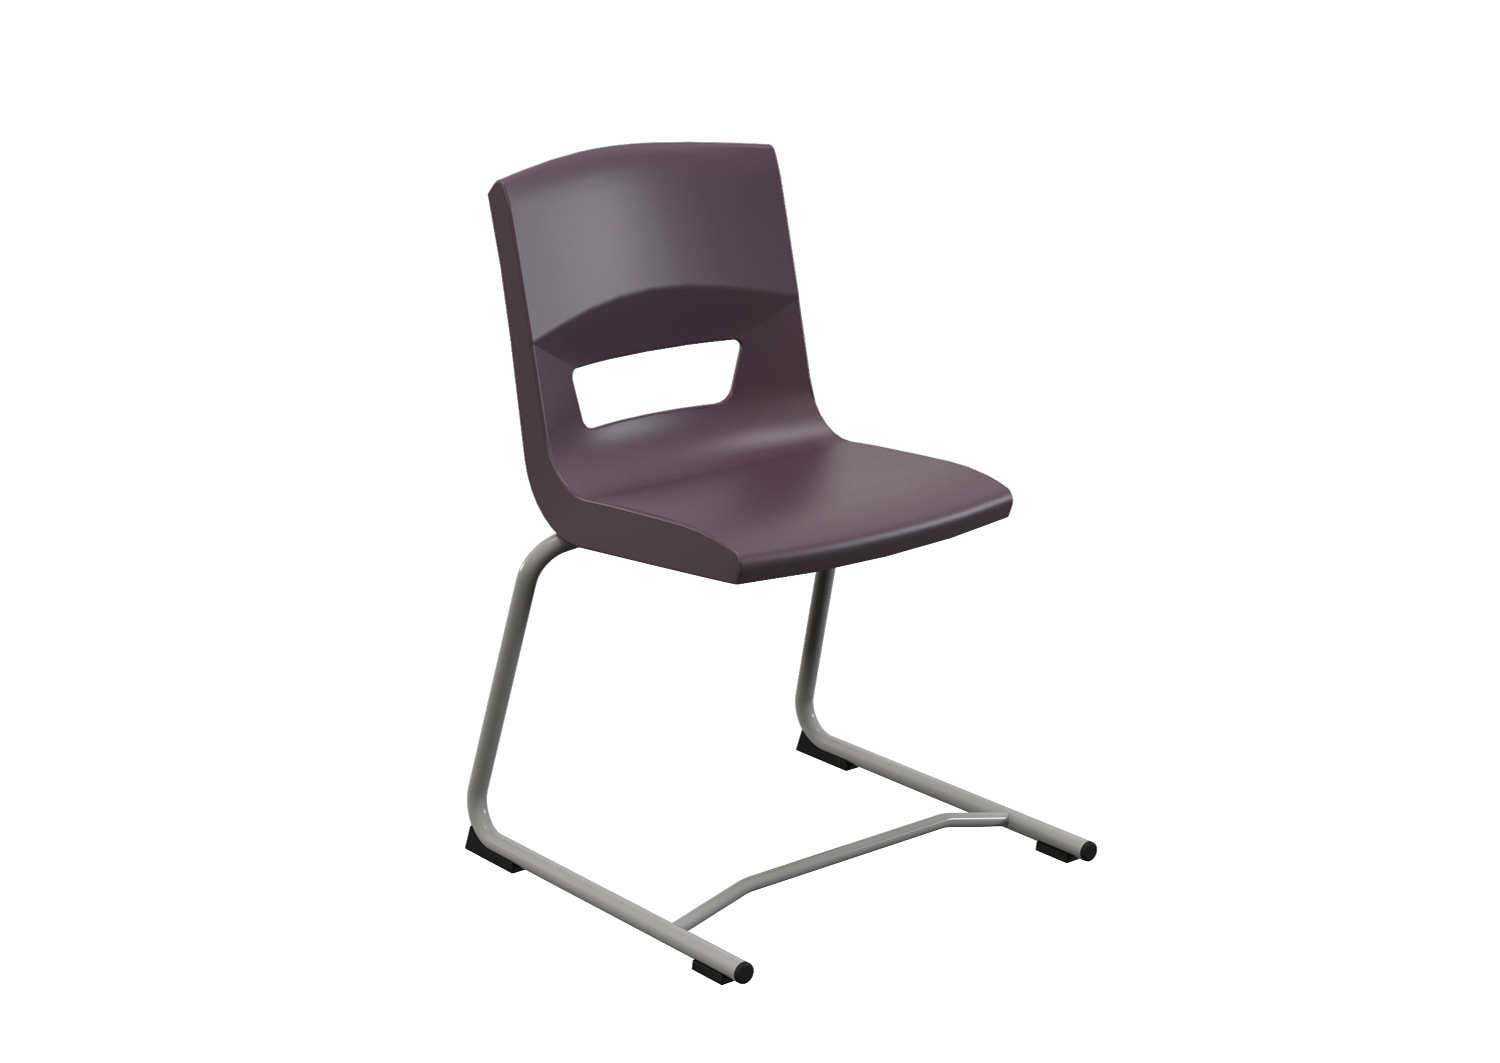 Postura reverse cantilevedr chair for classrom and kitchen iron grey